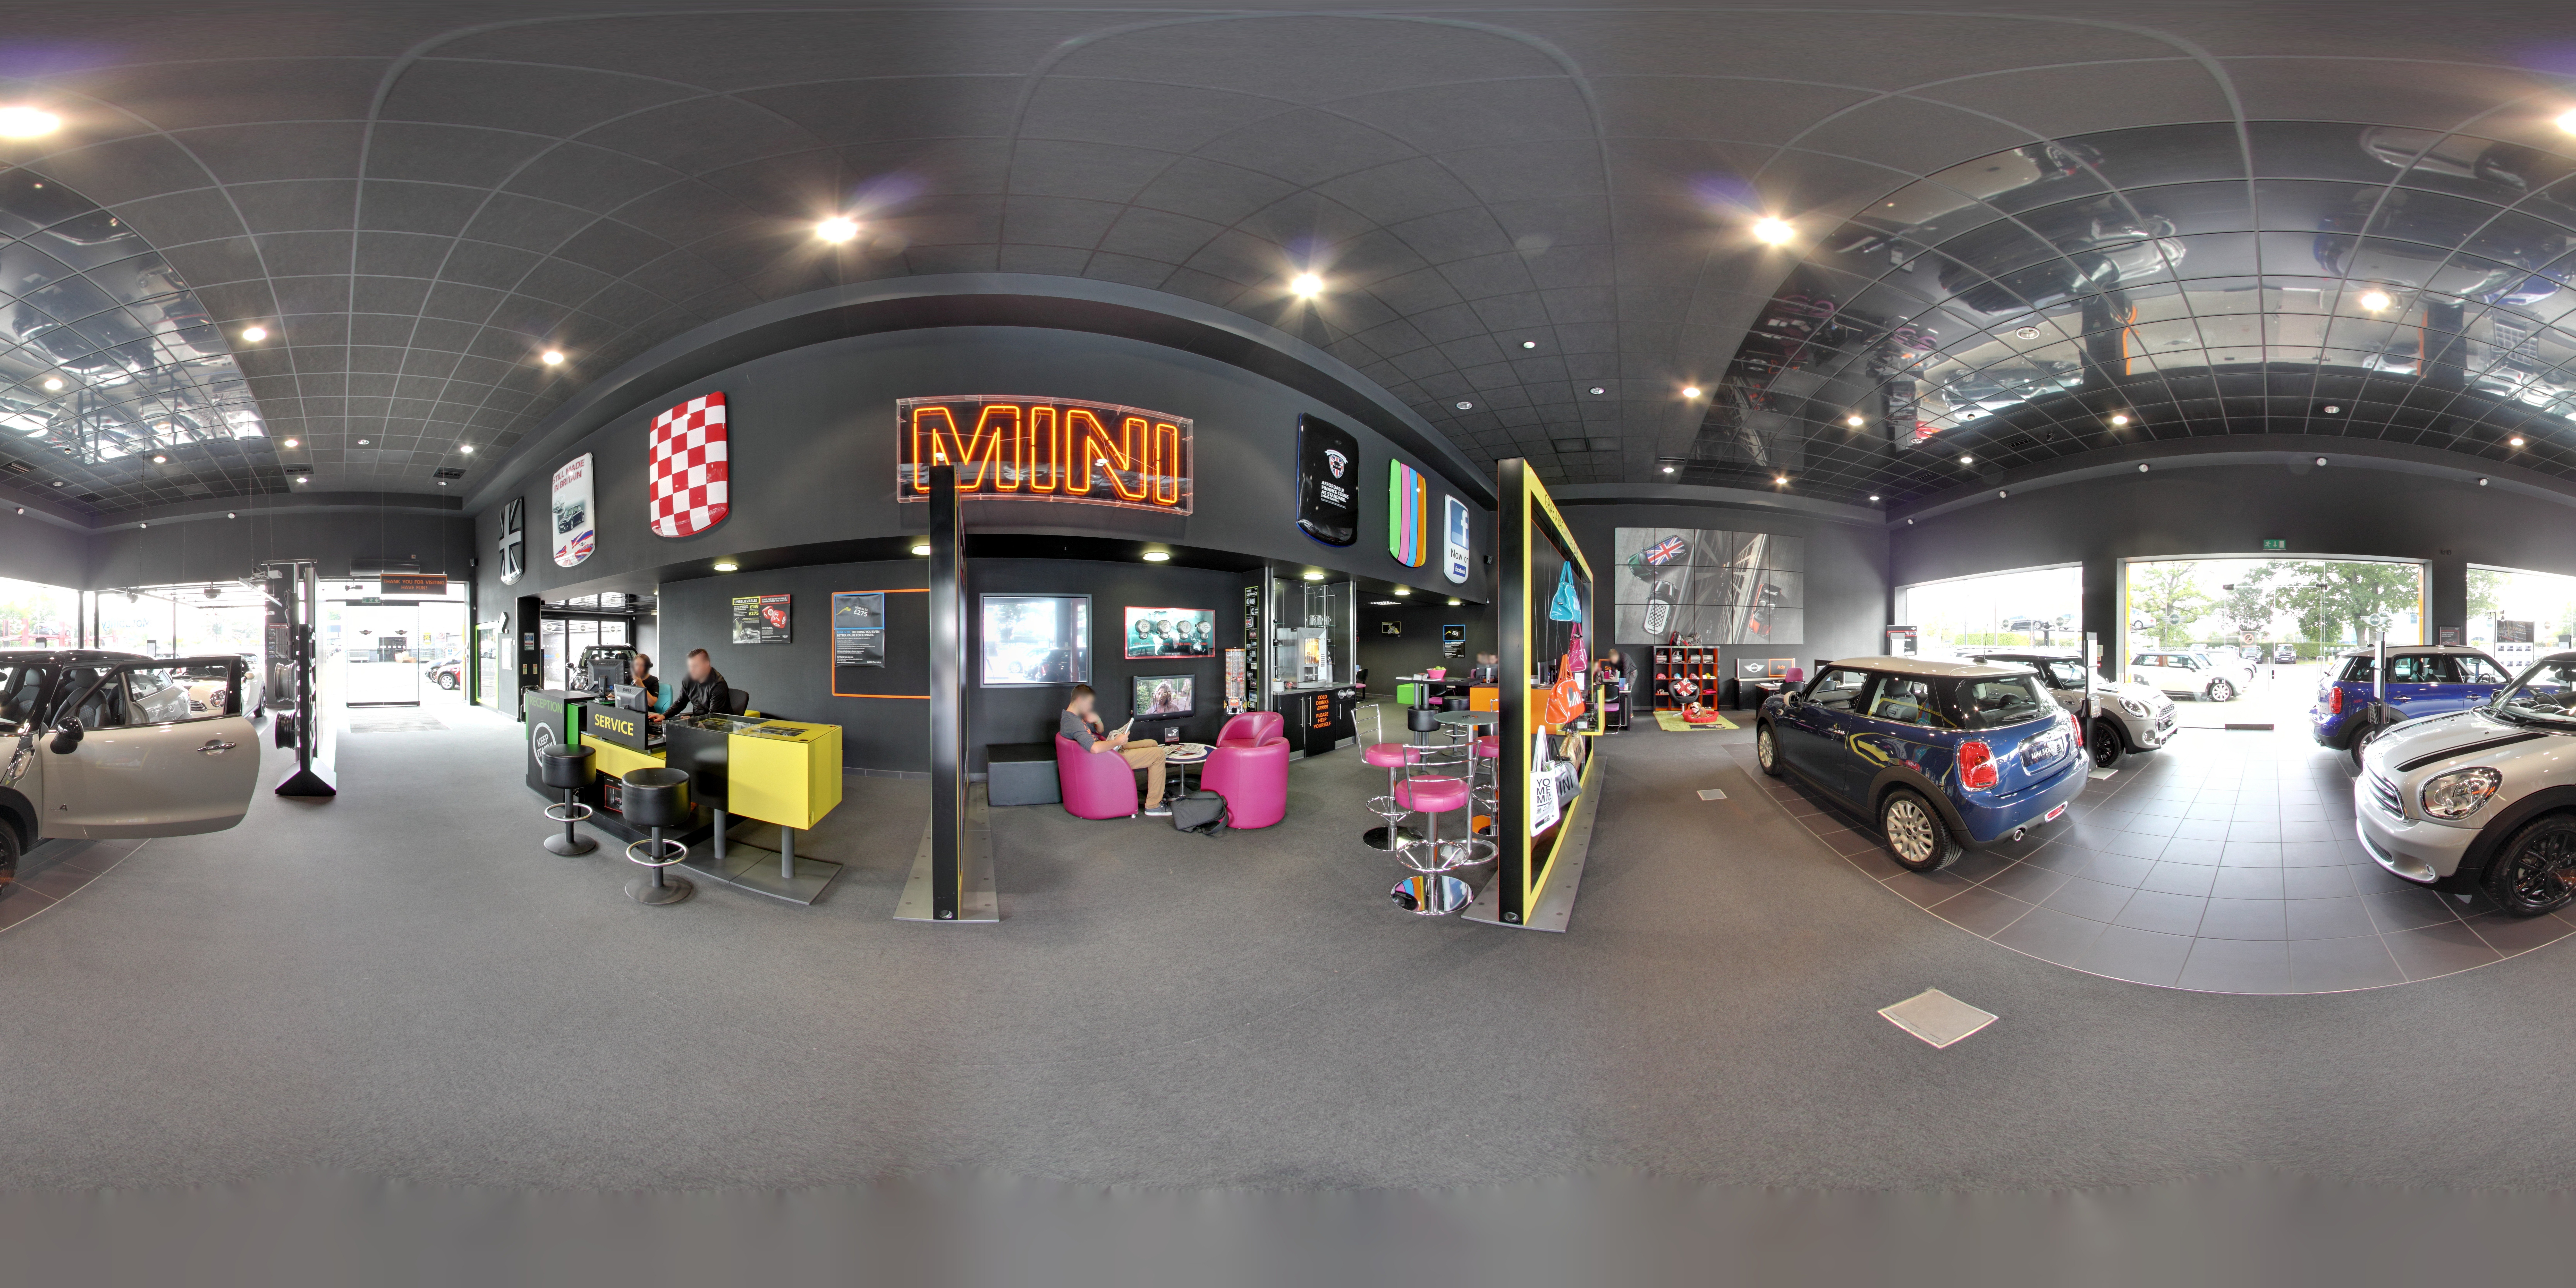 Images Sytner Solihull MINI